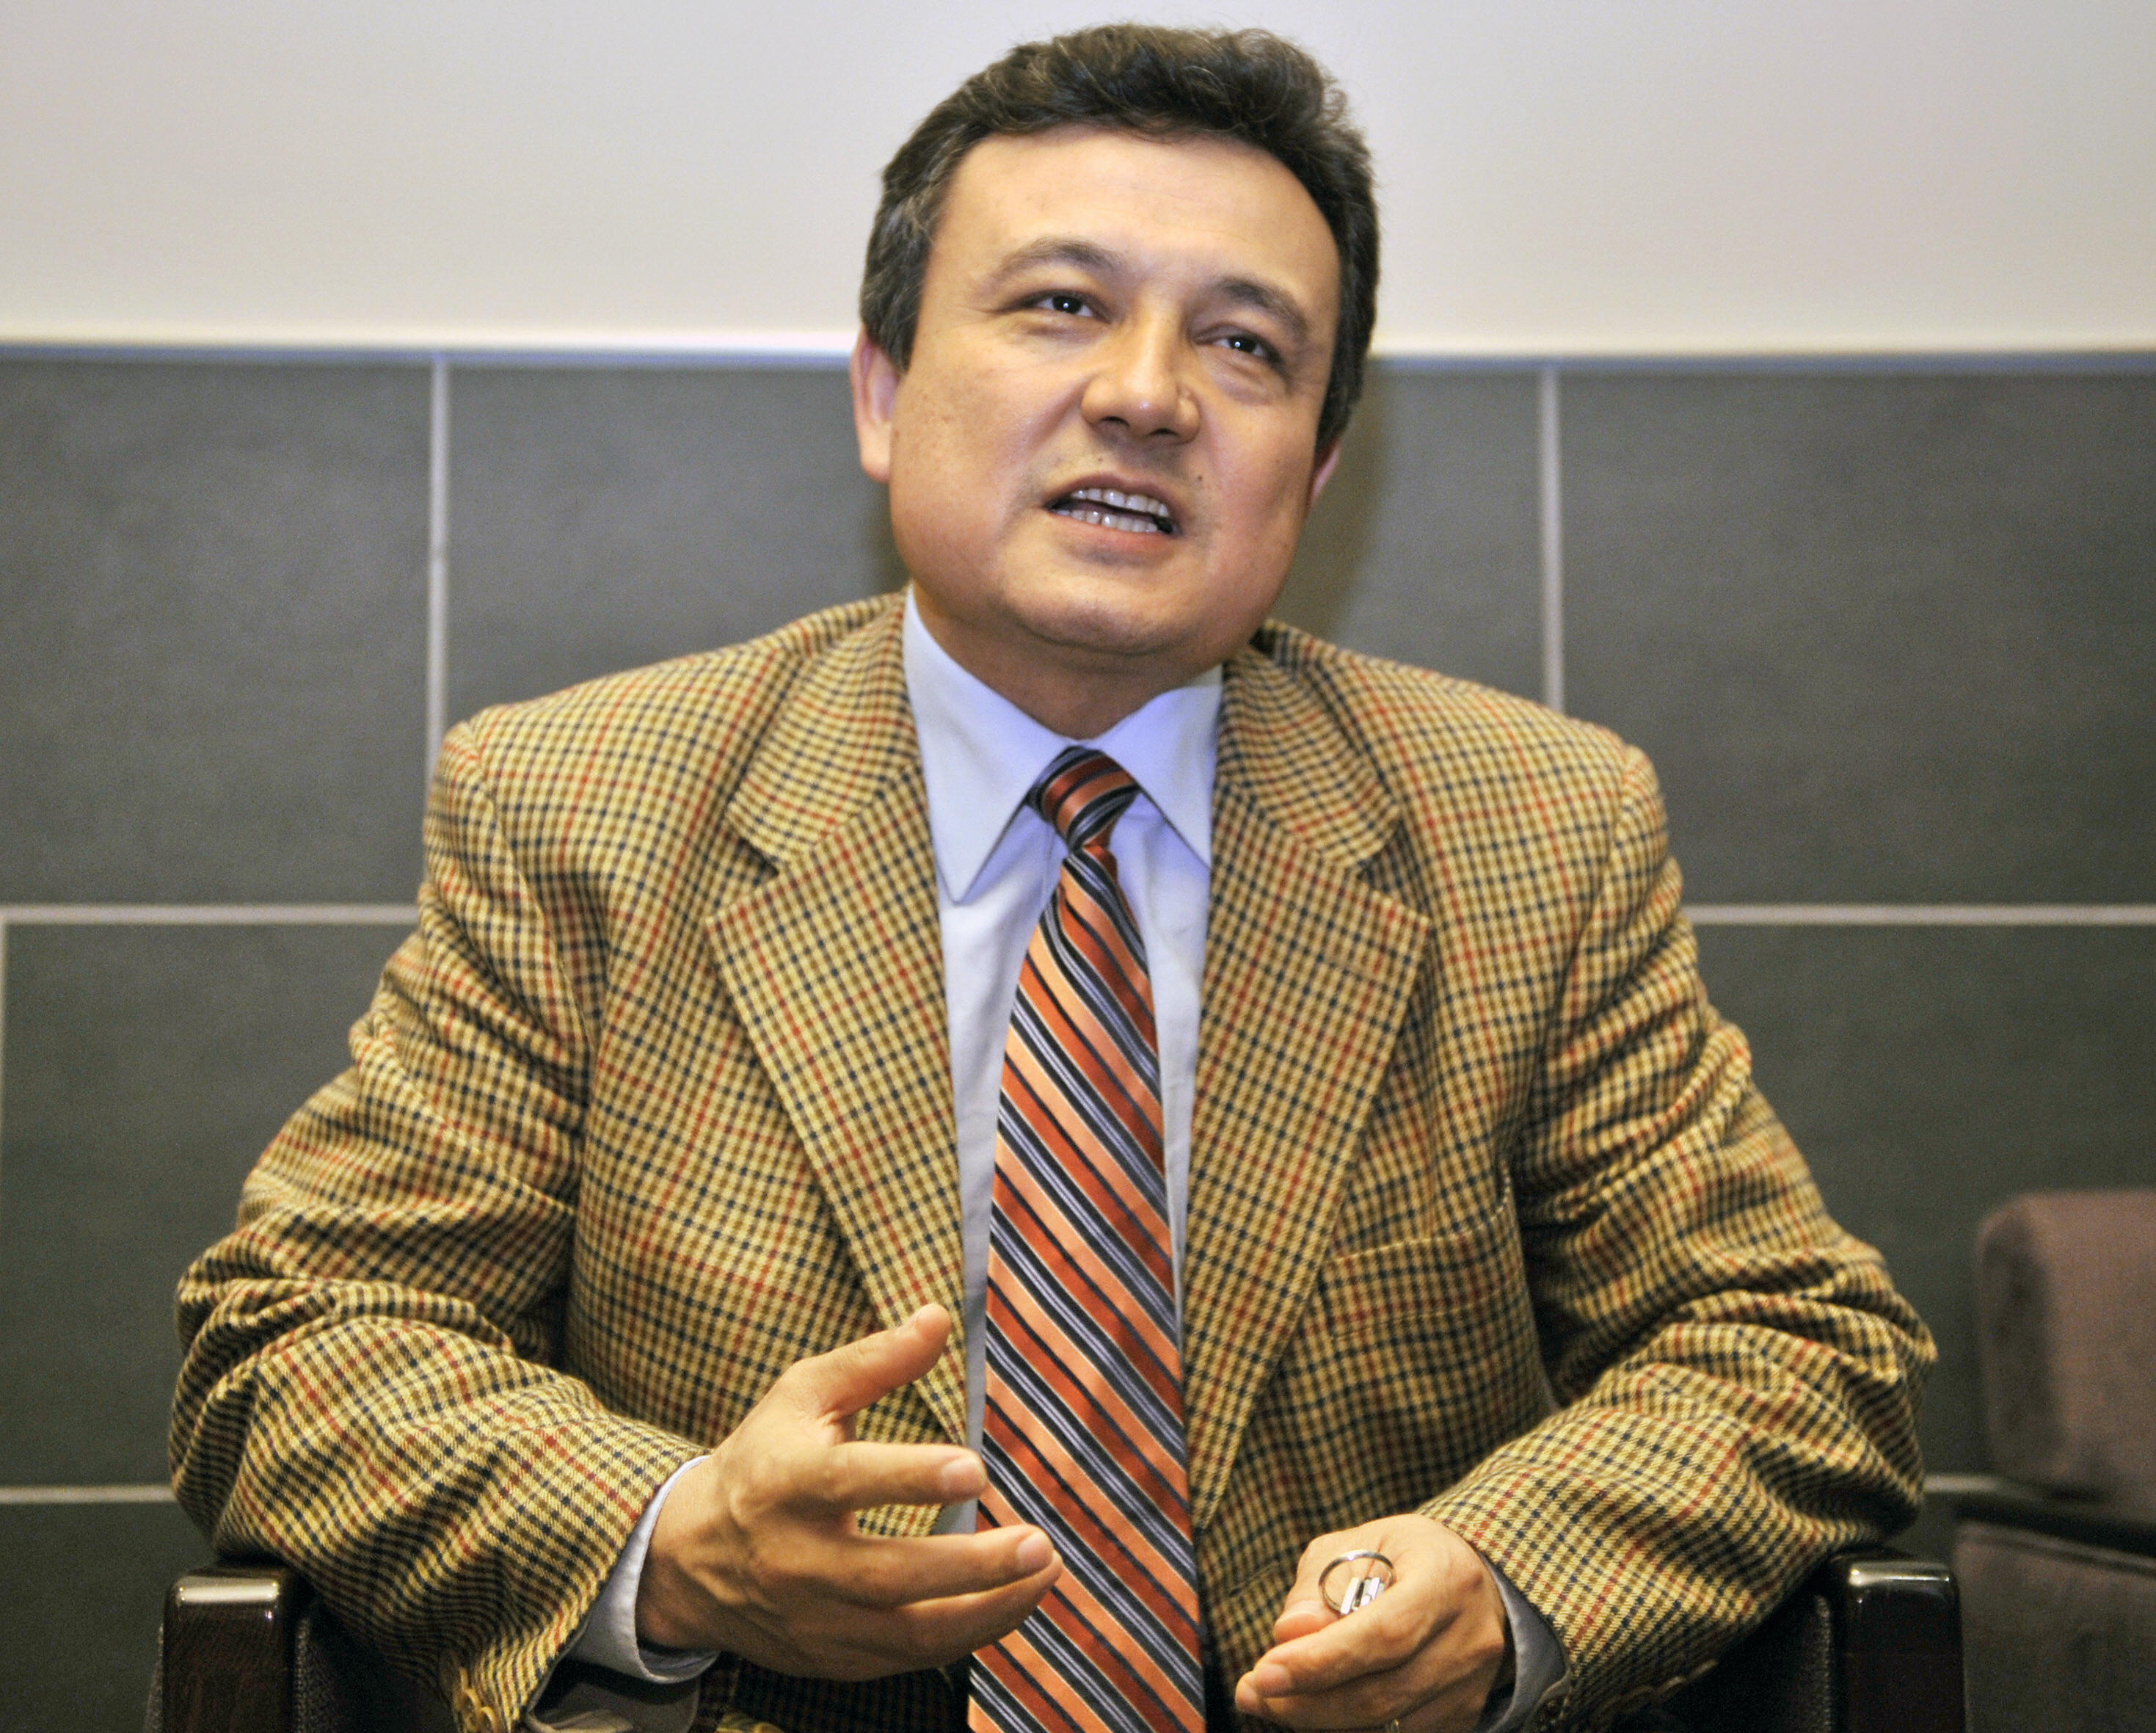 Dolkun Isa, secretary general of the World Uyghur Congress, speaks to a reporter during an interview in Tokyo on May 2, 2008 (YOSHIKAZU TSUNO—AFP/Getty Images)